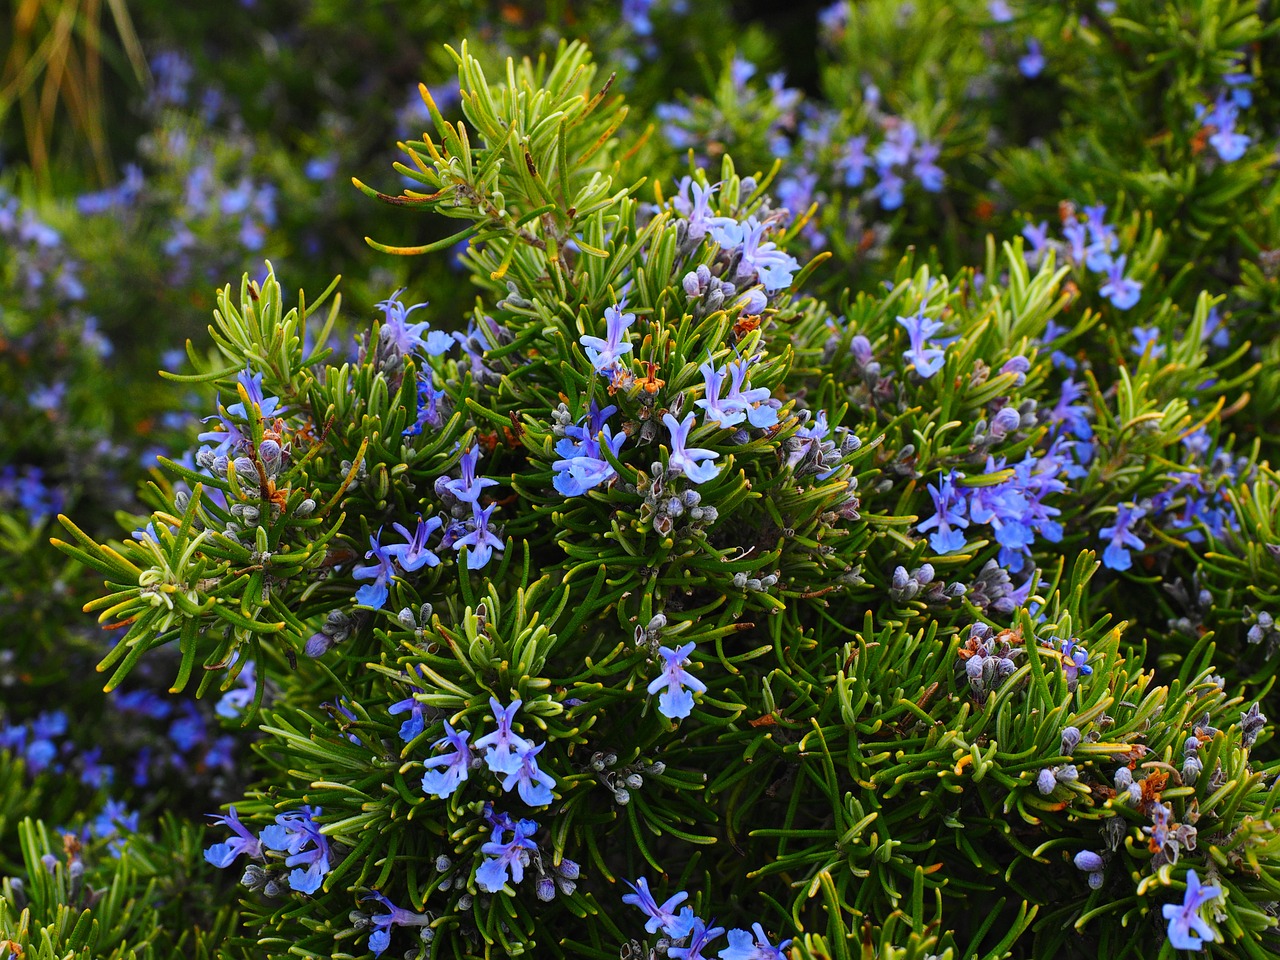 Image: Rosemary extract found to be a powerful anti-hyperglycemic solution for people who have problems with high blood sugar